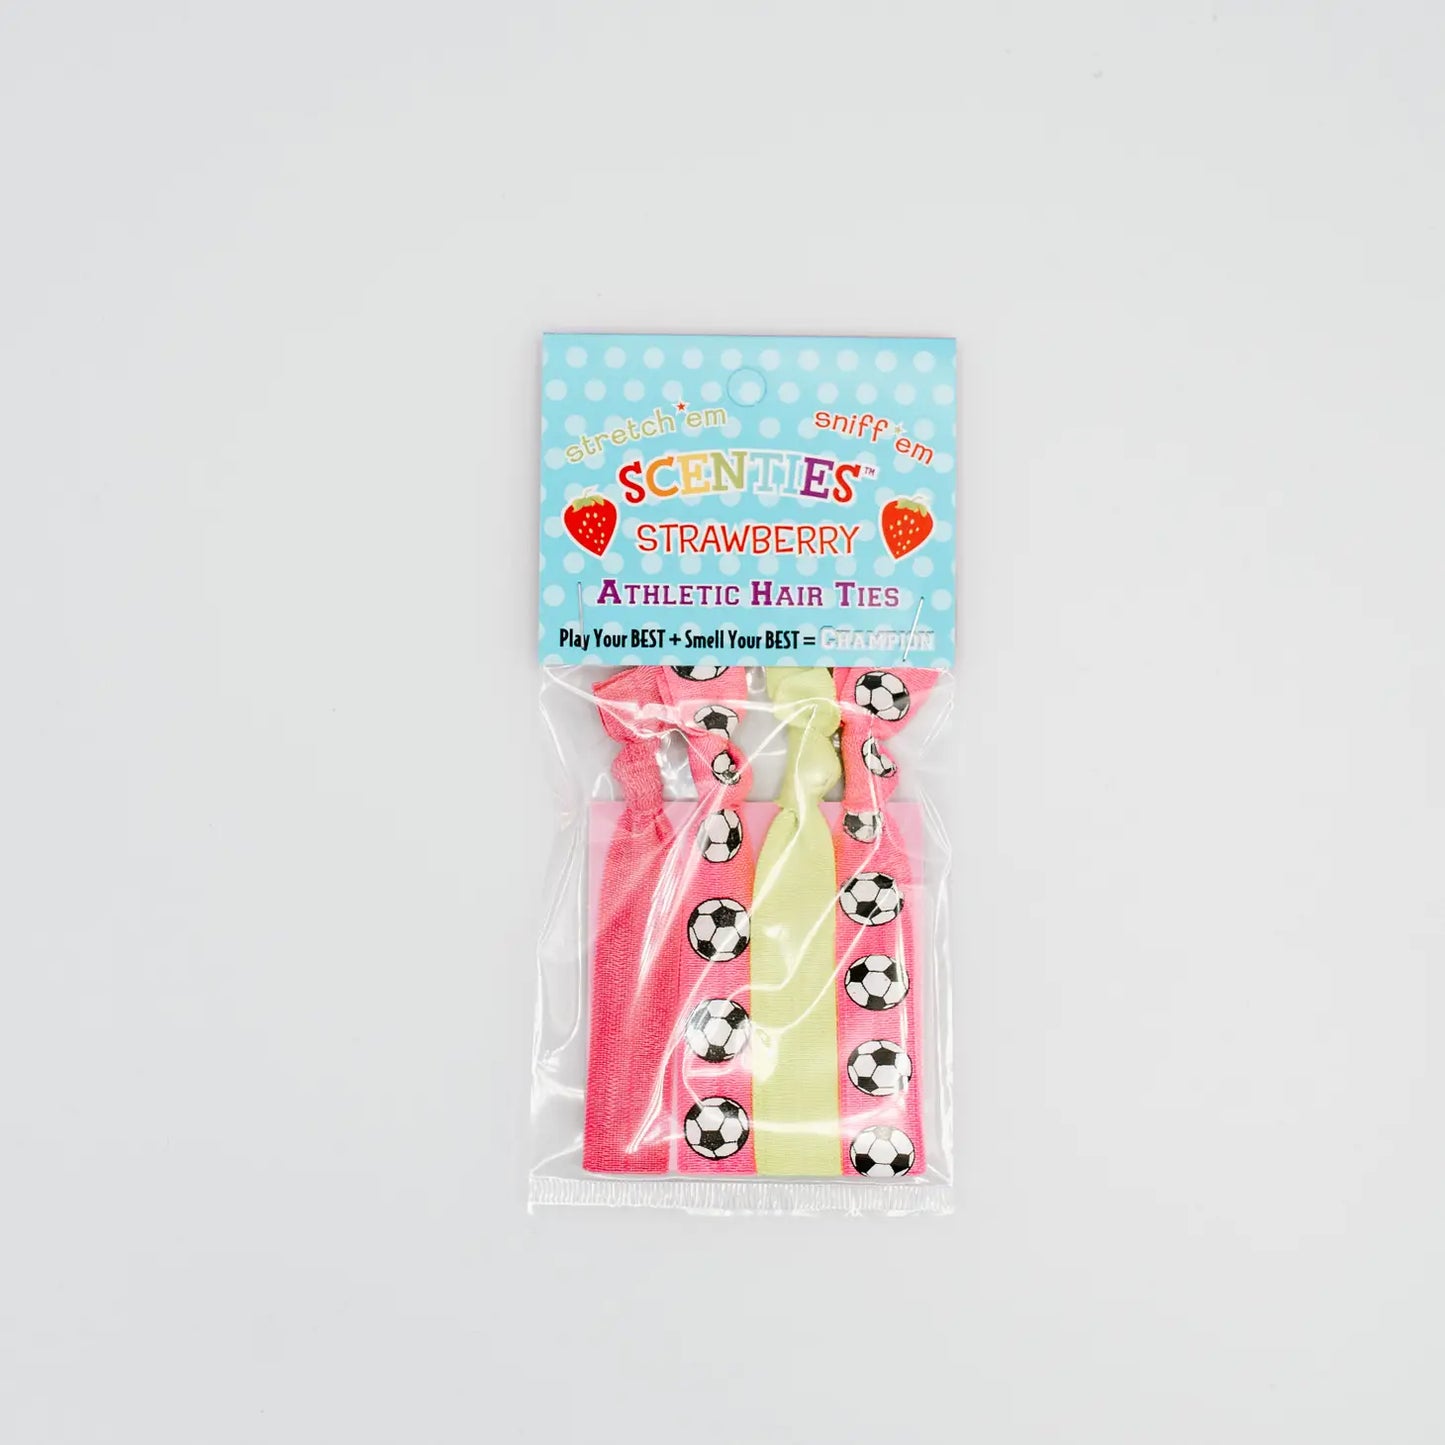 Soccer Athletic Hair Ties Strawberry Scented